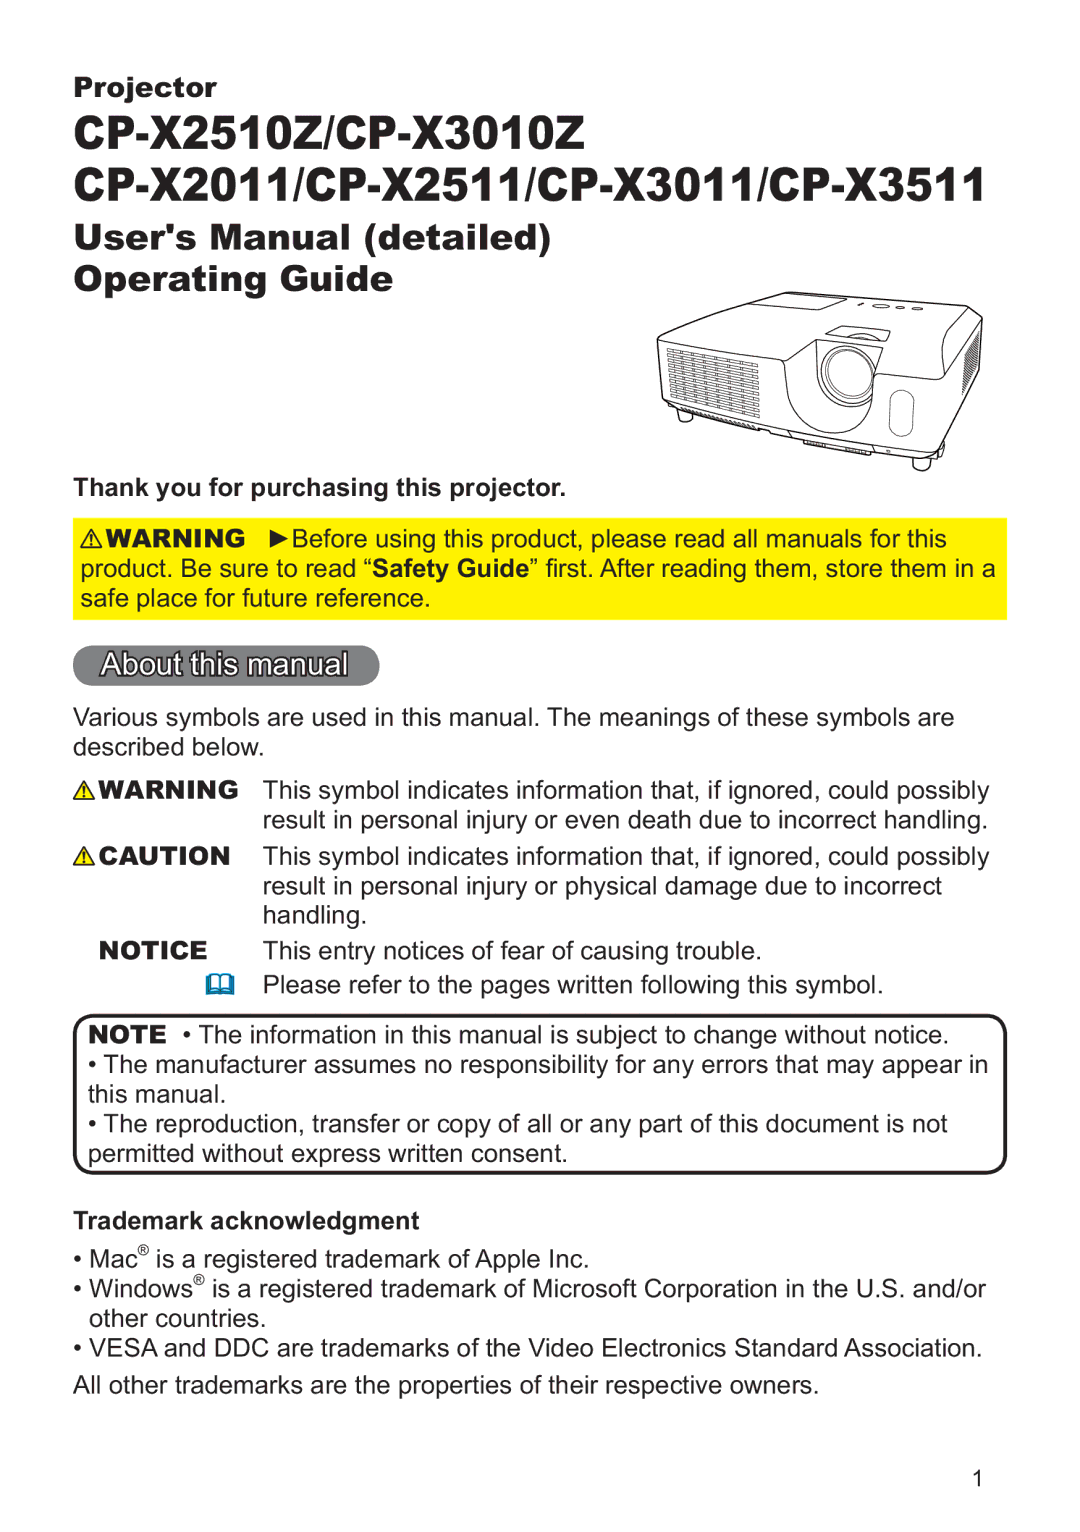 Hitachi CP-X3511, CP-X2011, CP-X3010Z user manual Thank you for purchasing this projector, Trademark acknowledgment 